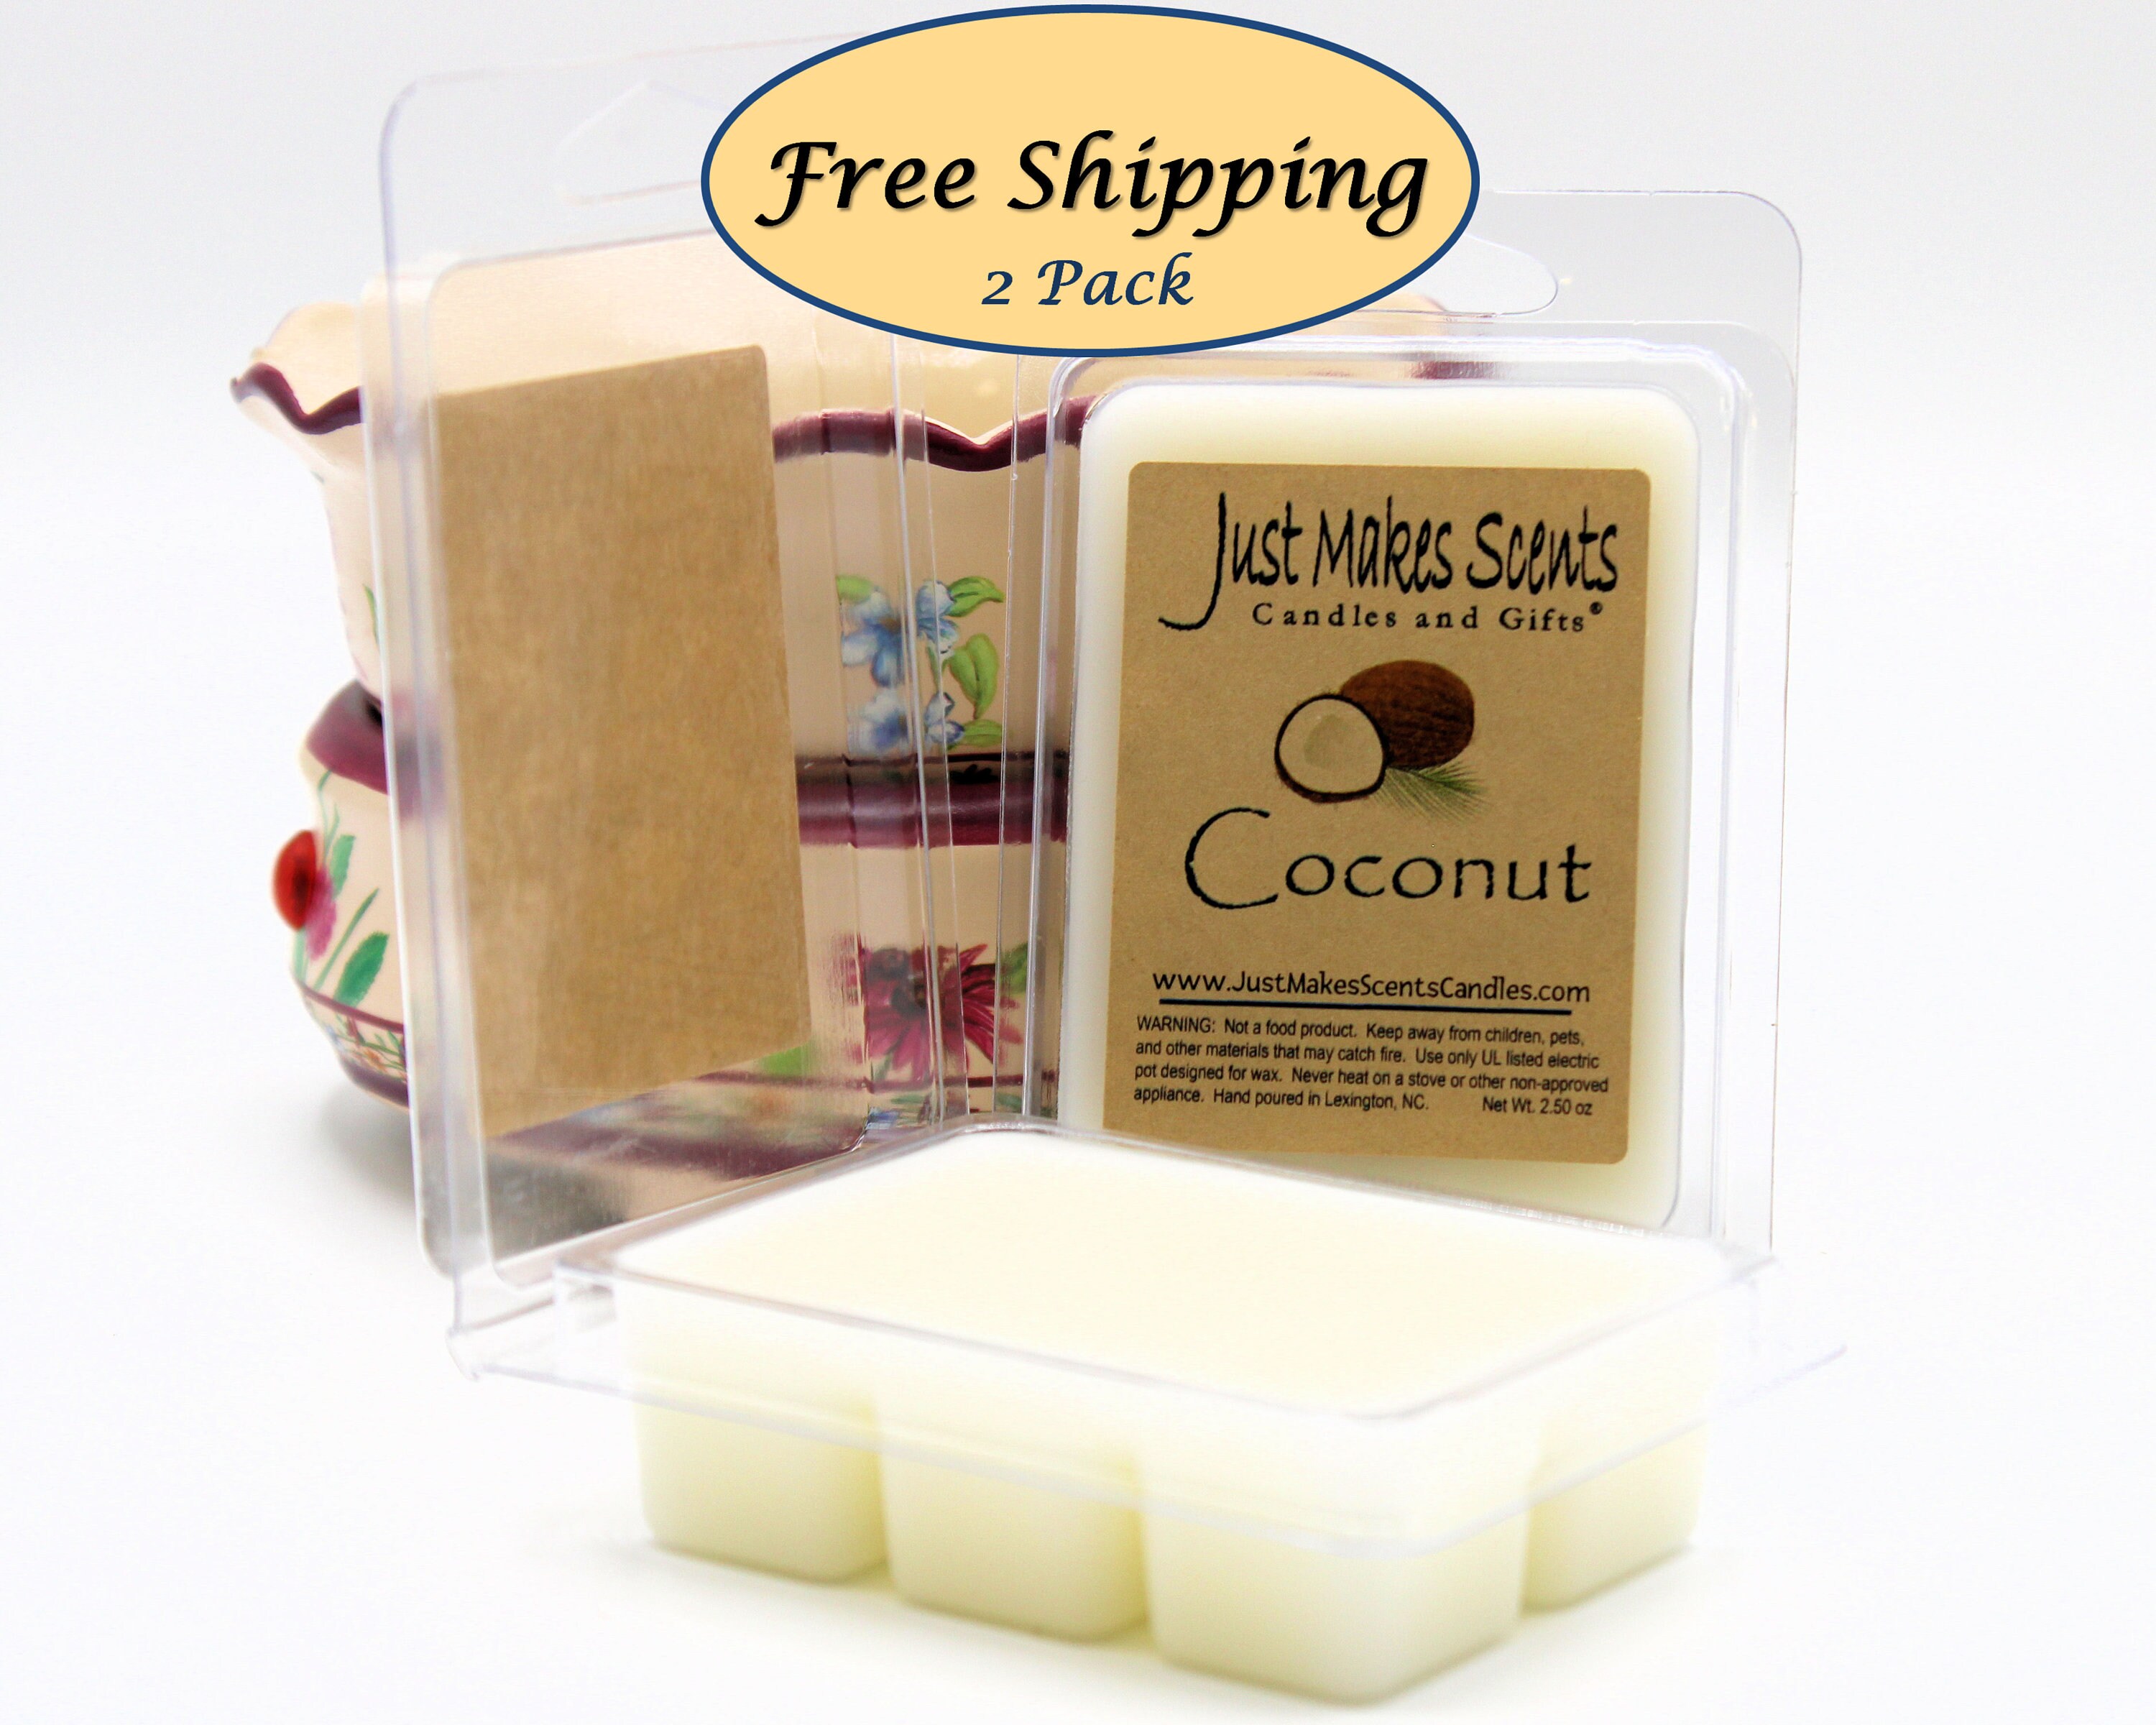 Clove Scented Wax Melts 2 Pack With FREE SHIPPING Scented Soy Wax Cubes  Compare to Scentsy® Wax Bars 